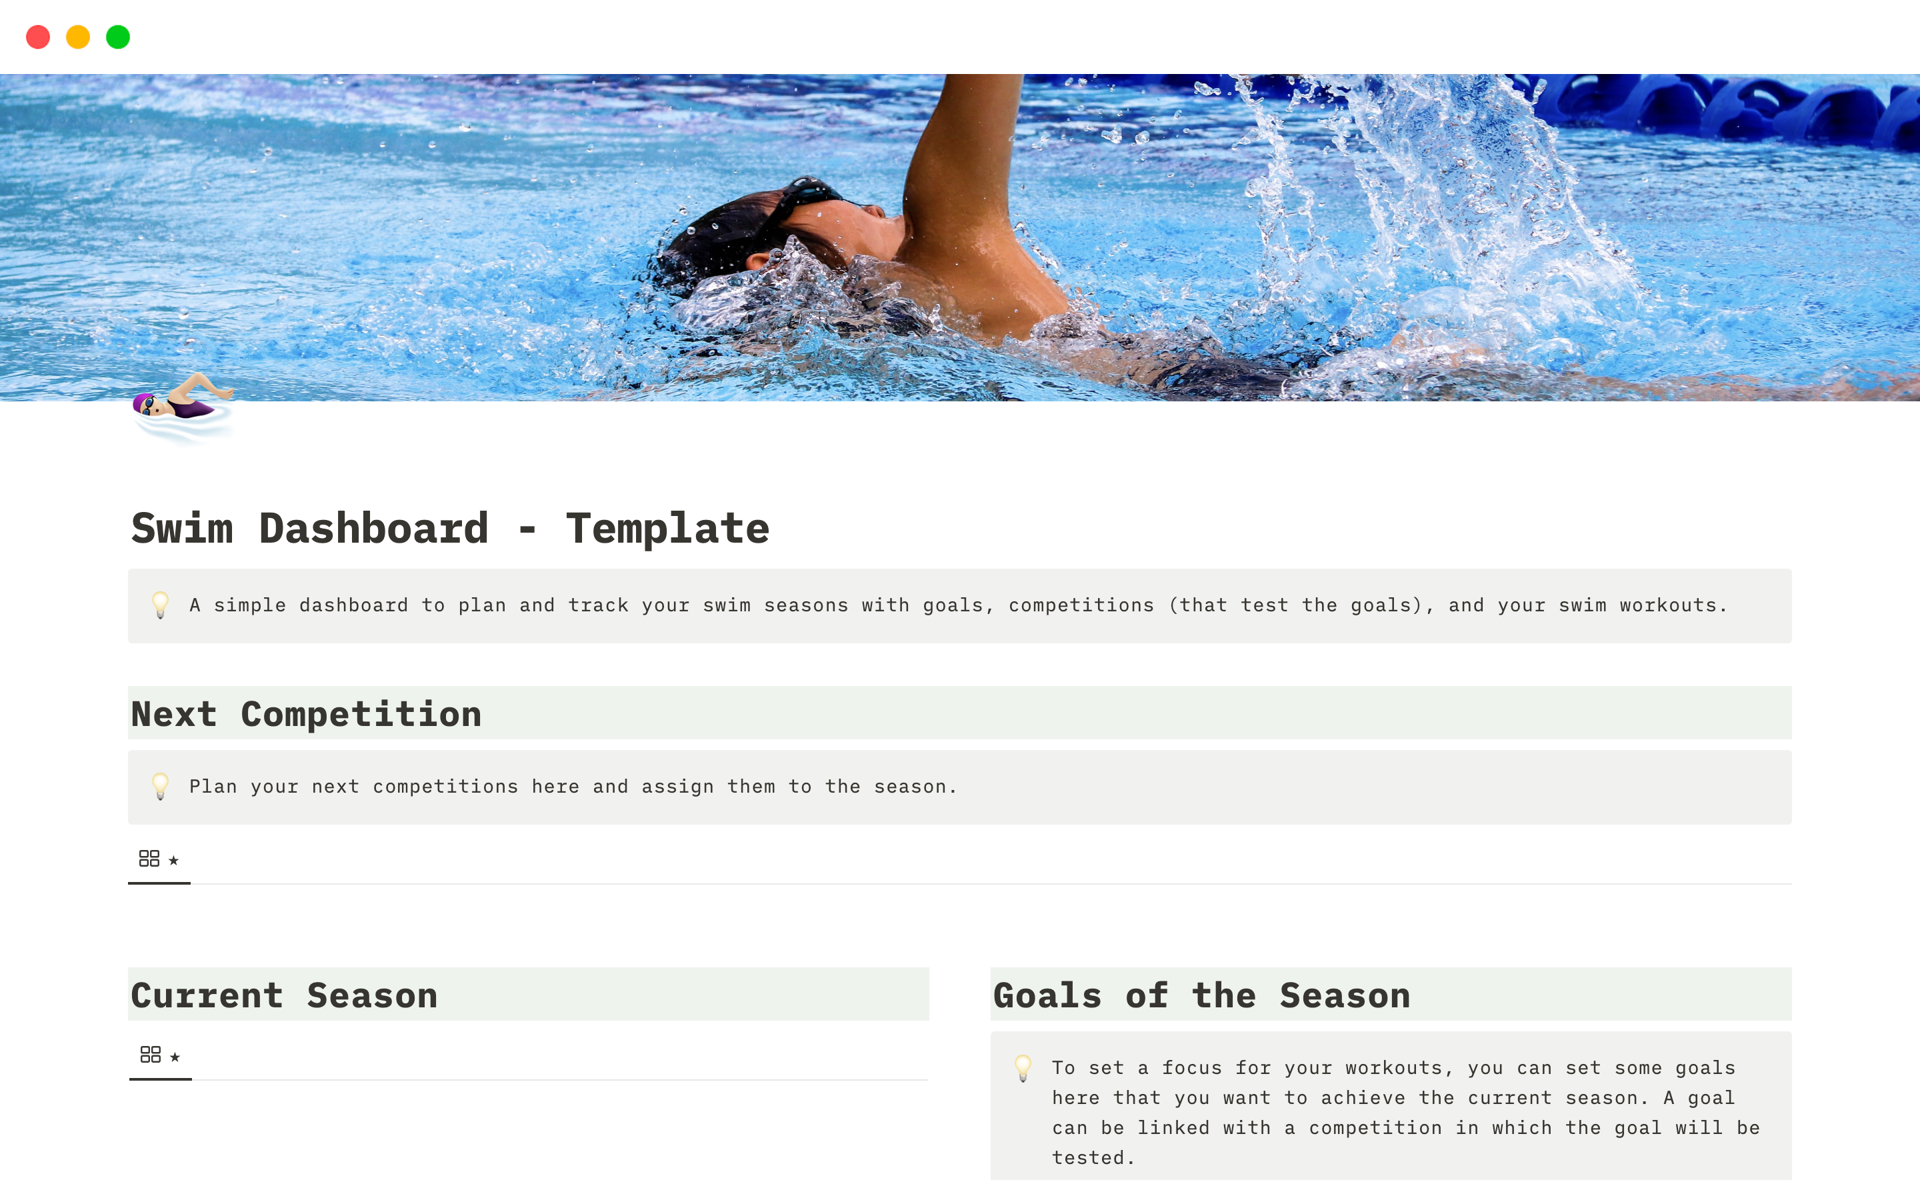 This template allows you to plan and track your swim workouts.